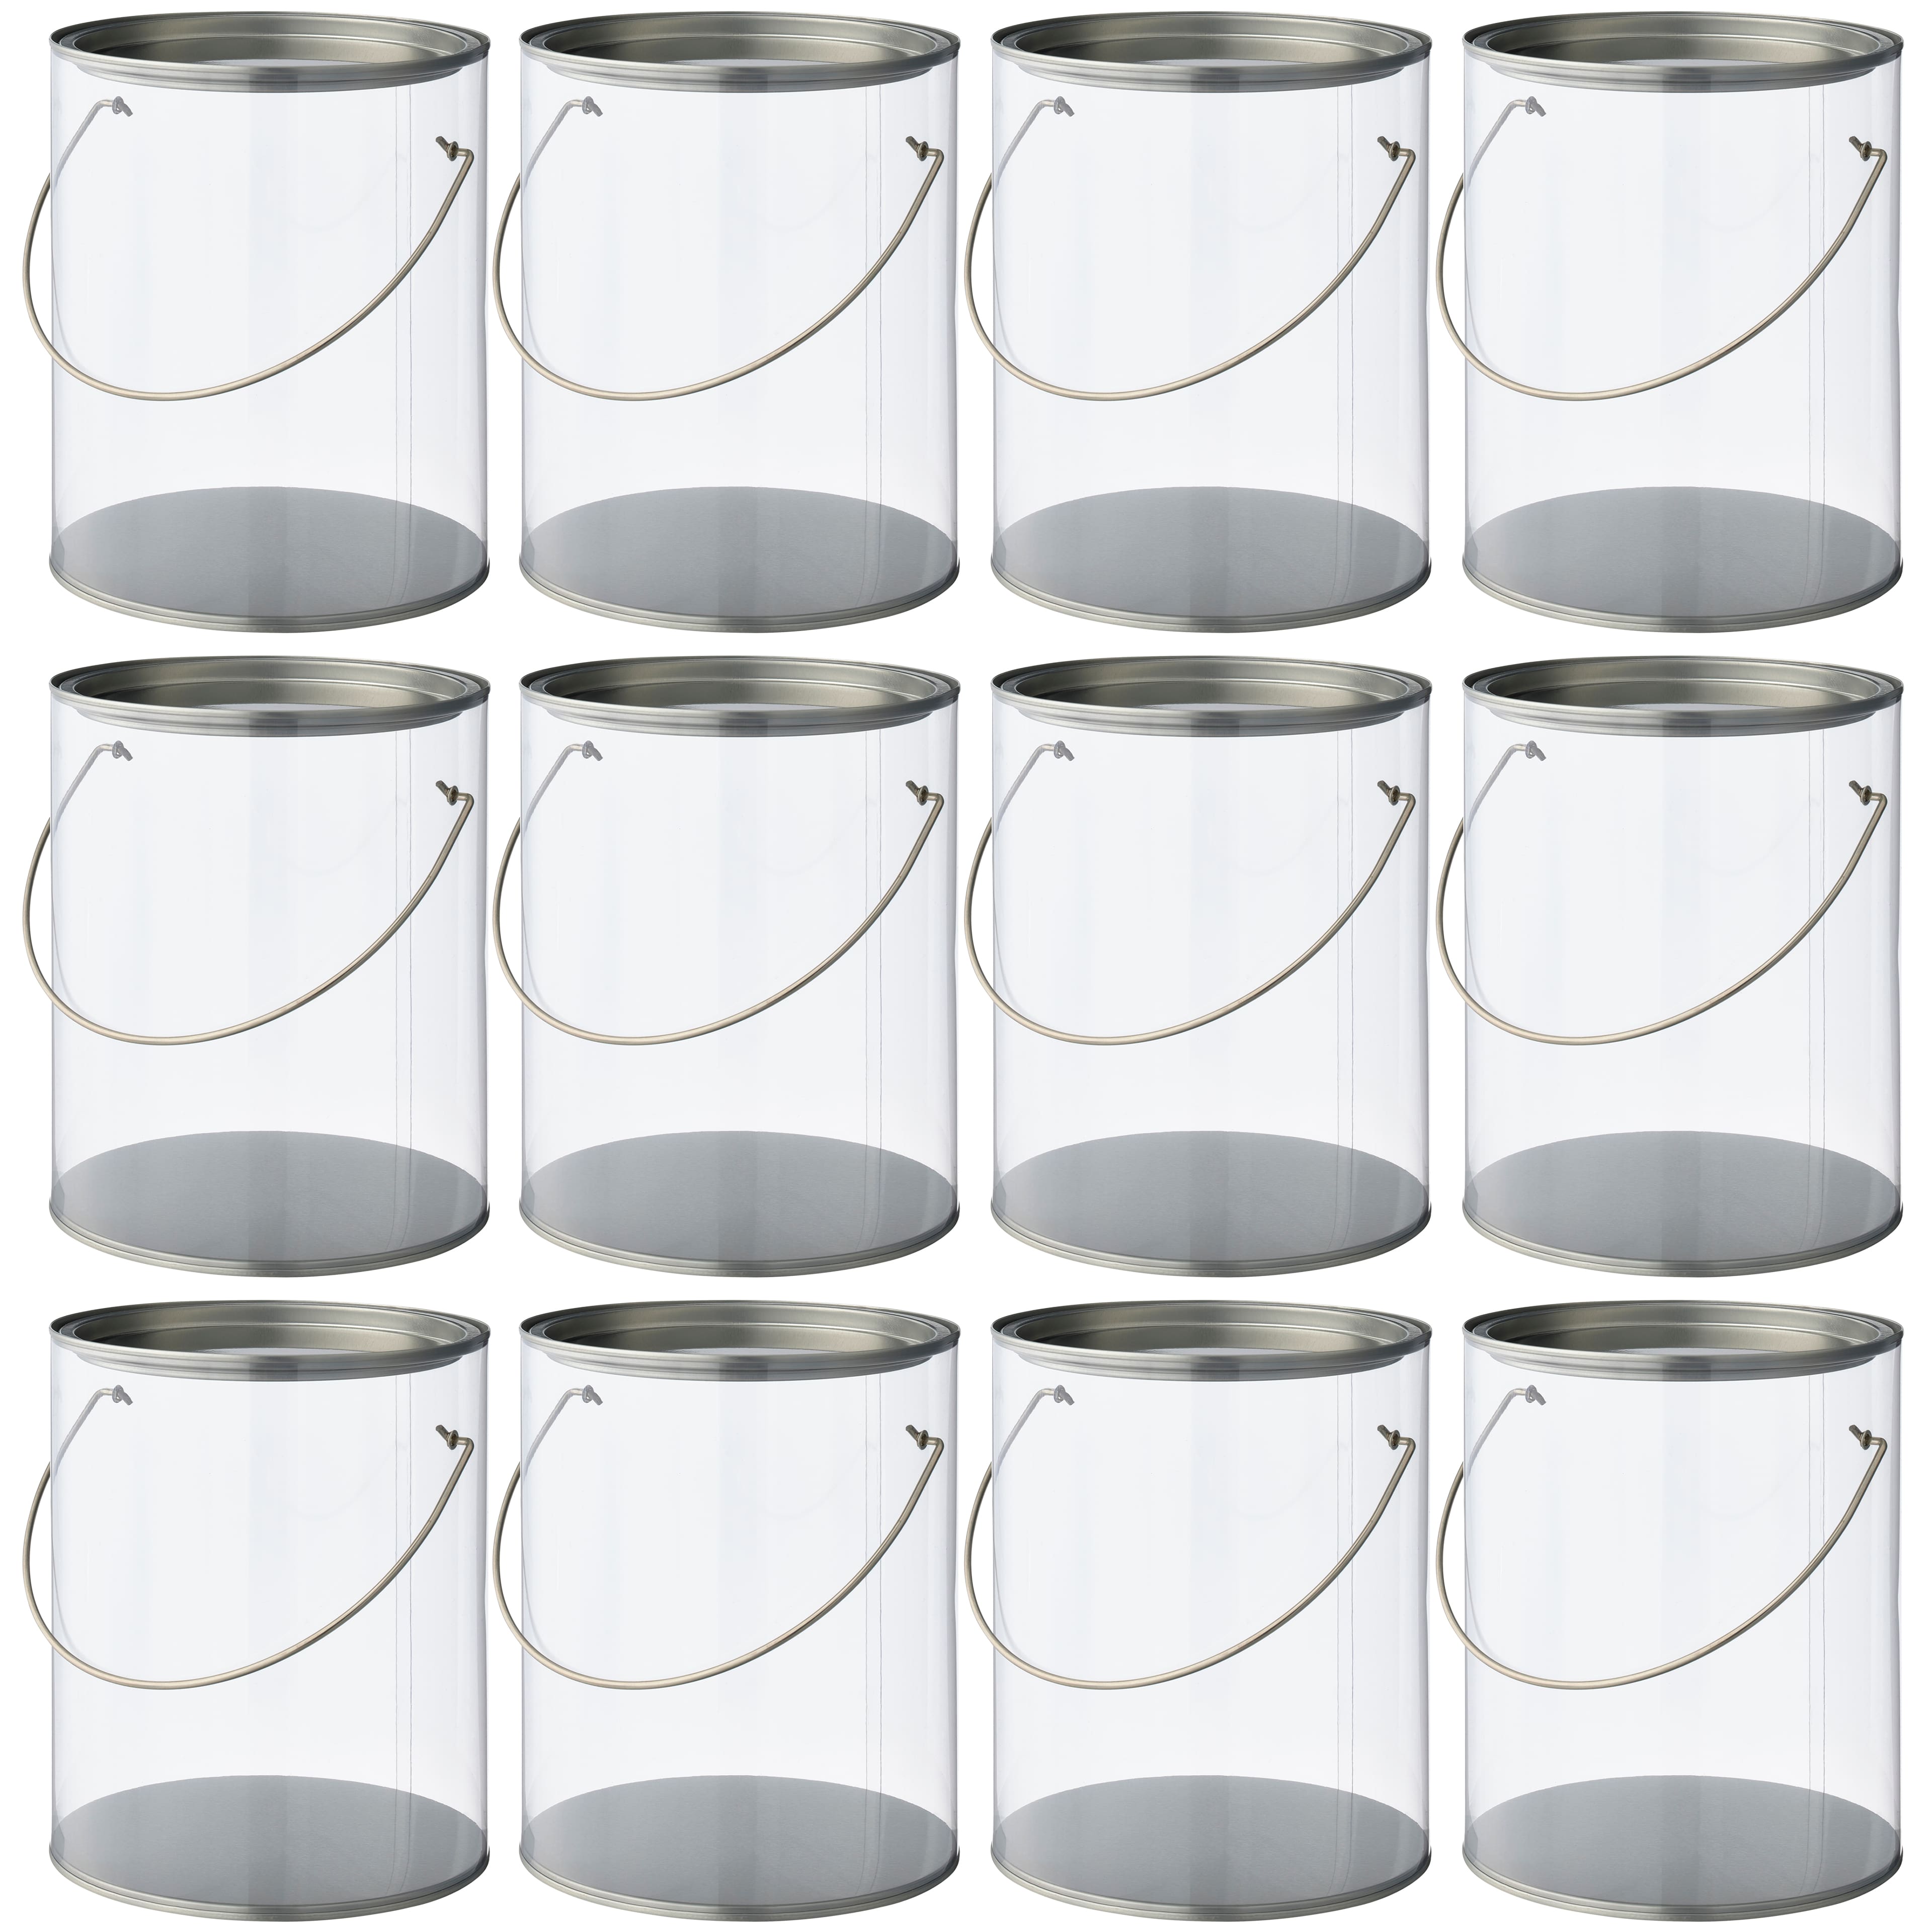 24 Pack Mini Metal Buckets with Handles for Party Favors, Small